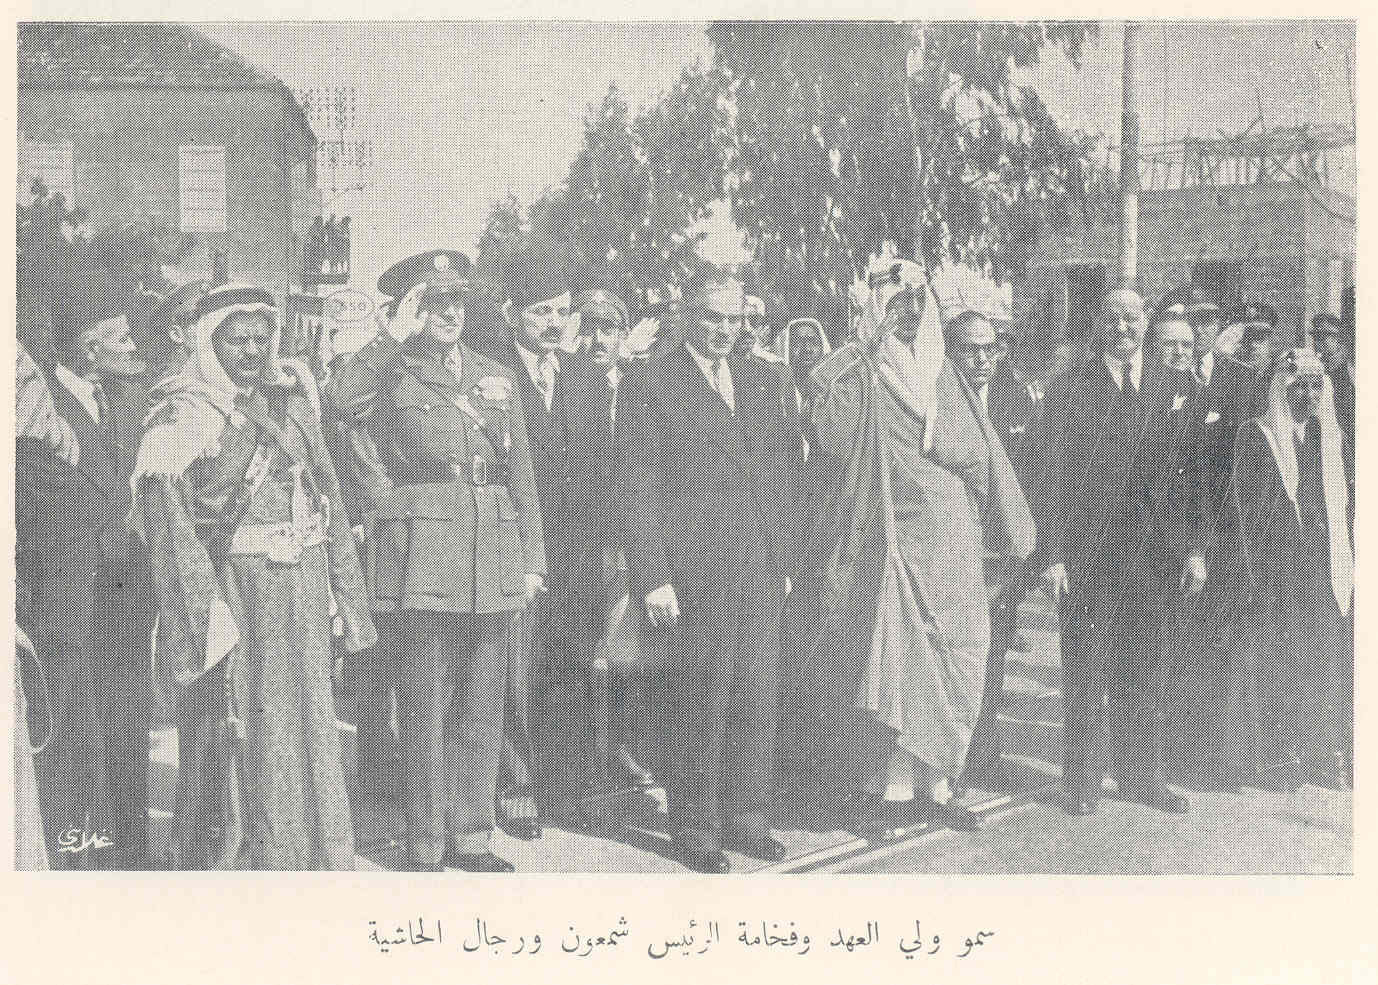 Crown Prince Saud President Camille Chamoun and courtiers Beirut 1953